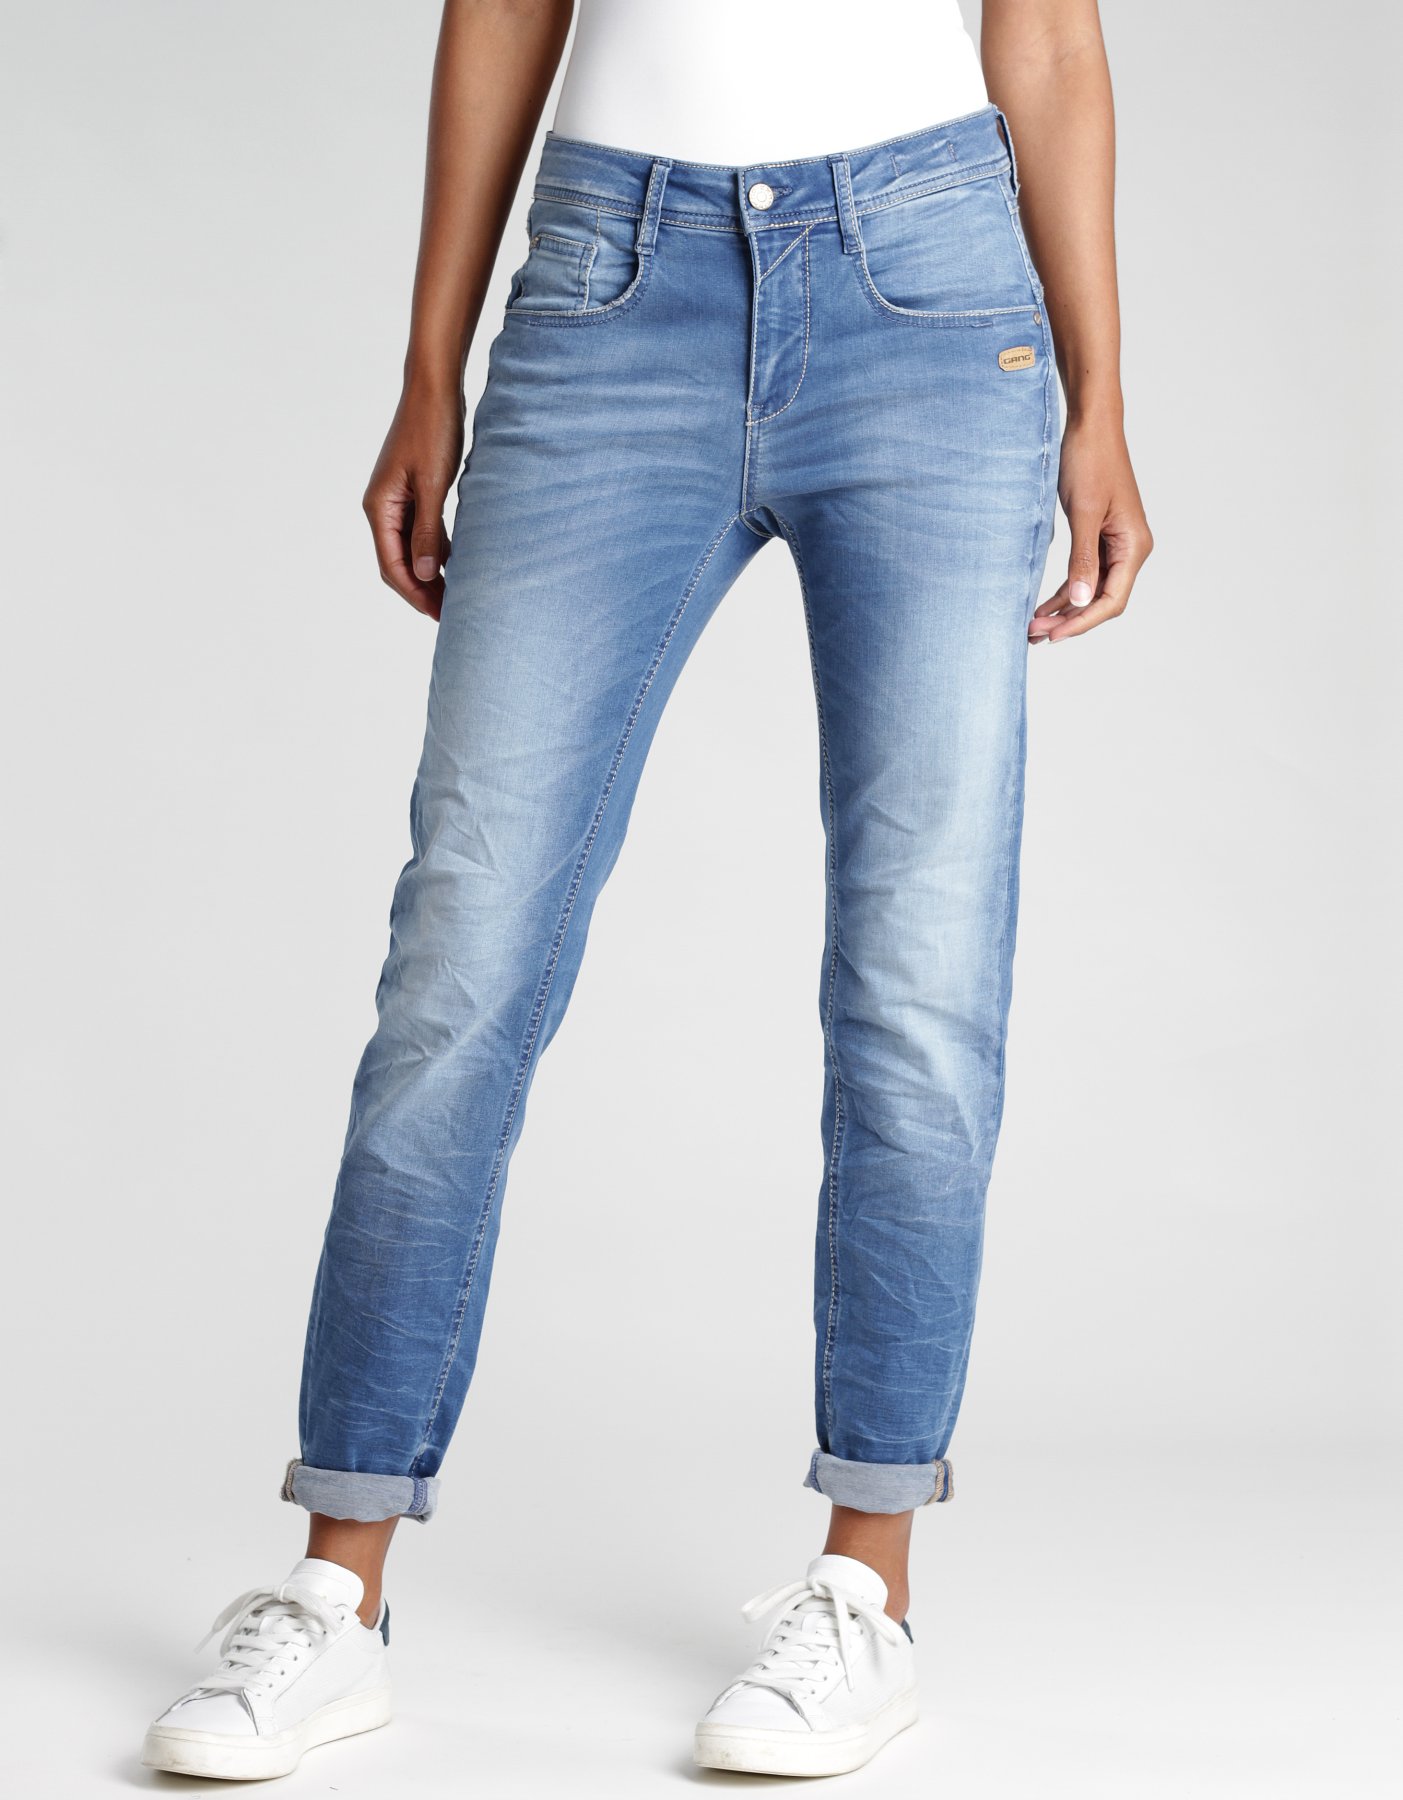 GANG DAMEN 94AMELIE CROPPED-RELAXED FIT | DOWN Jeans Hosen | JEANS TRULY VINTAGE | Engelheym